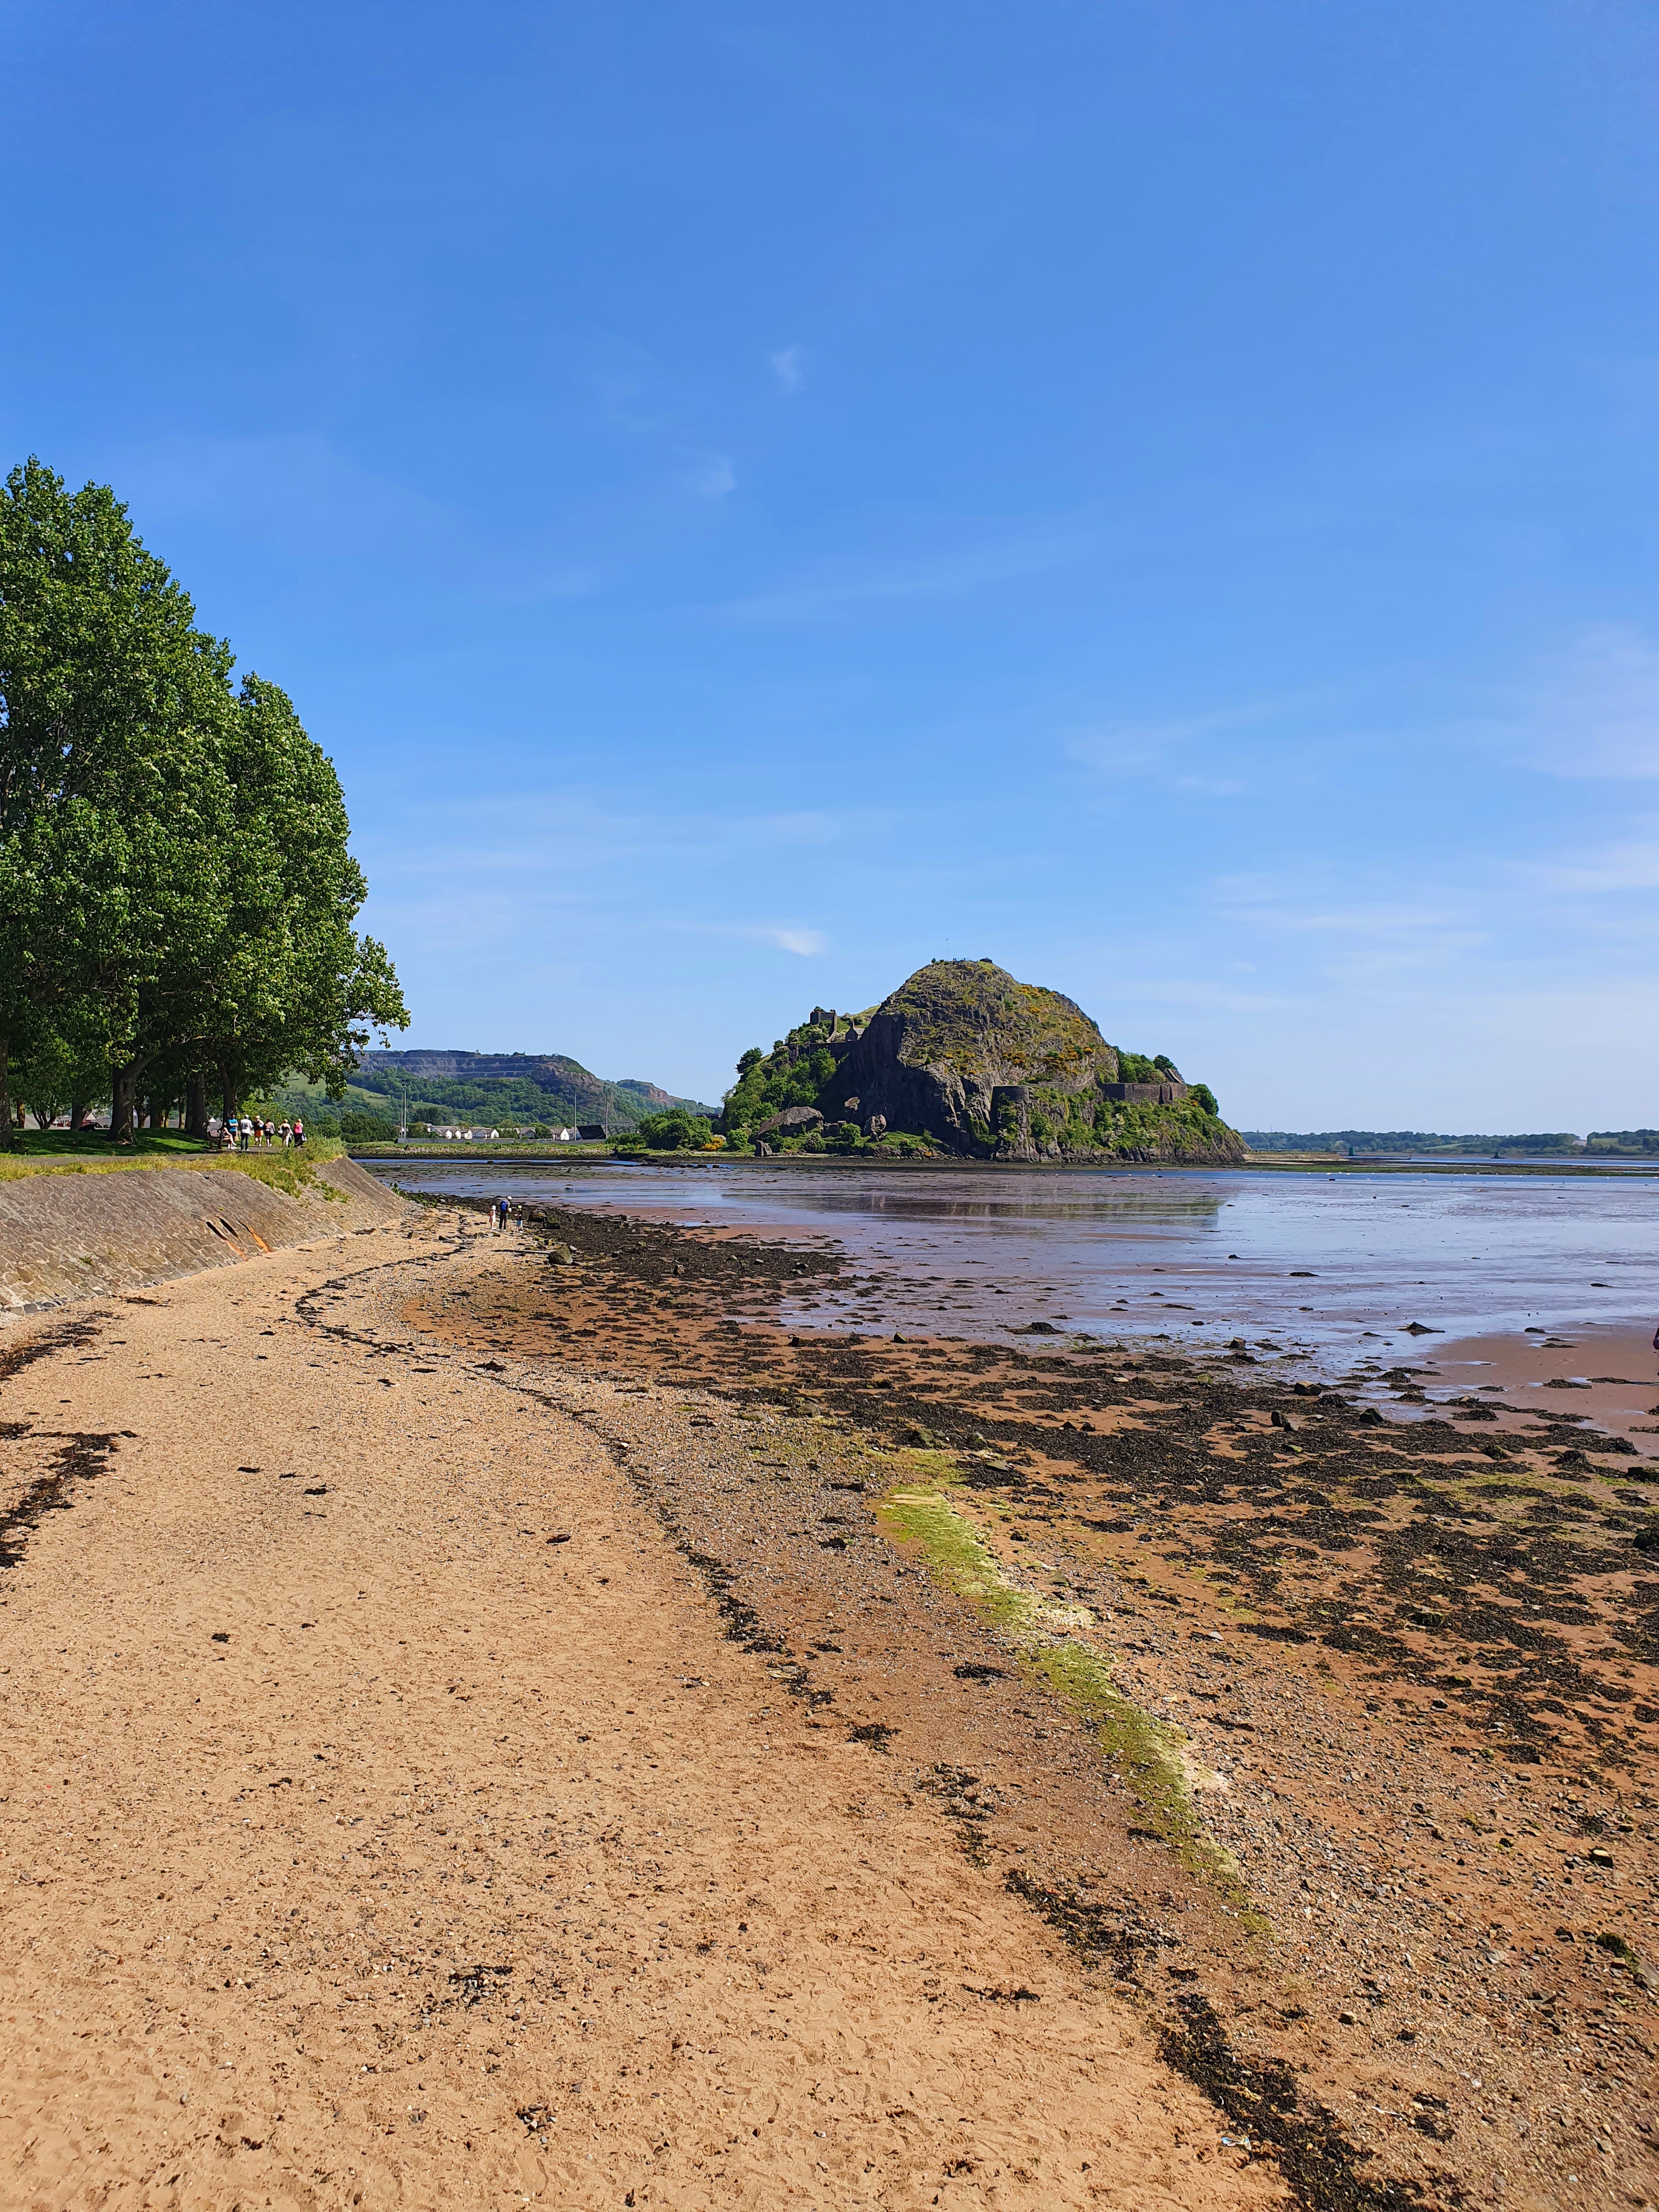 A visit to Dumbarton castle | What you can do in and around the castle 🏰